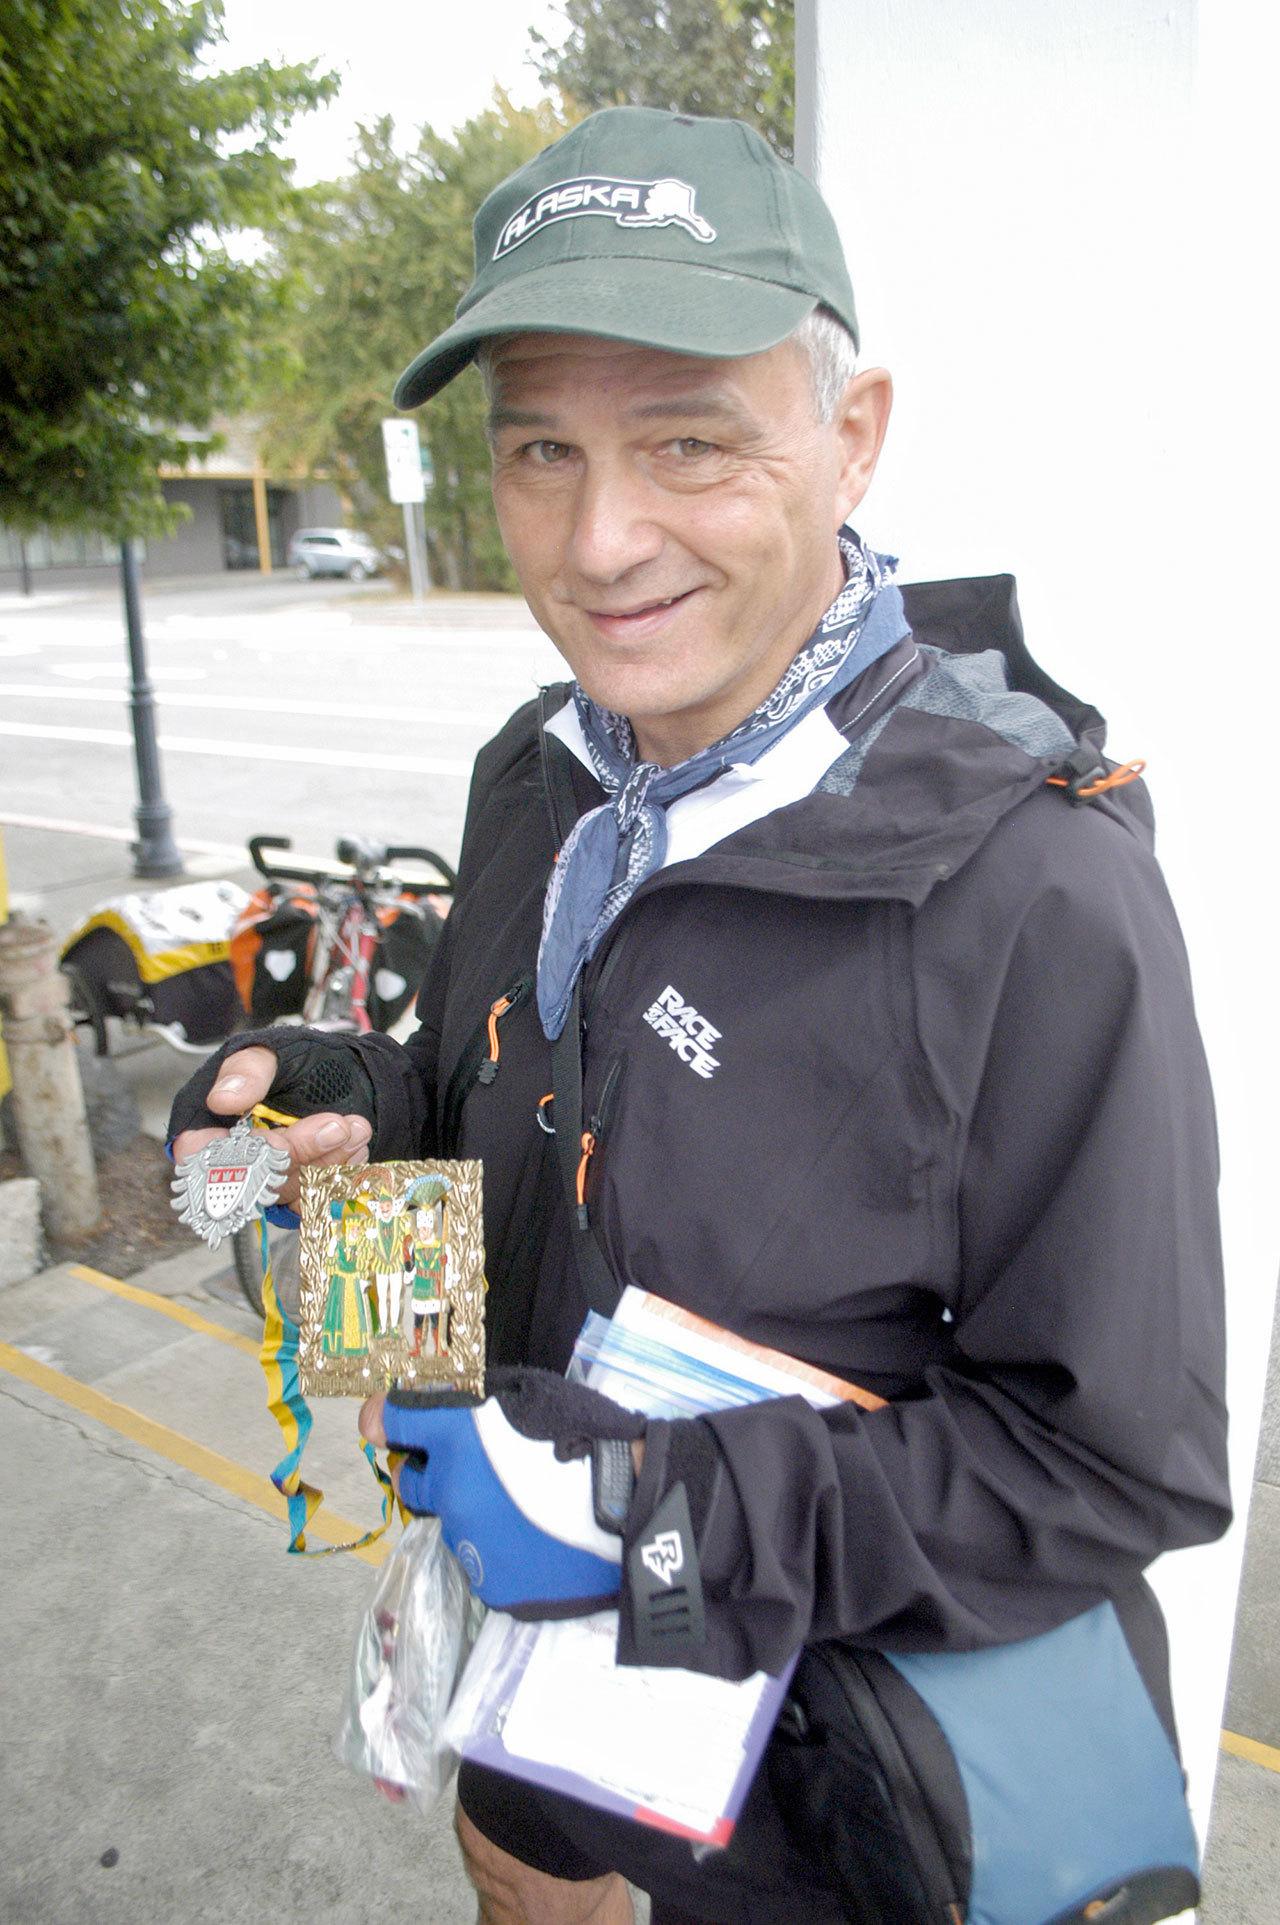 Klaus Luttgen of Germany is riding his bicycle from Vancouver, B.C., to San Francisco this month, giving away carnival medals from his hometown to interesting folks along the way. (Chris McDaniel/Peninsula Daily News)